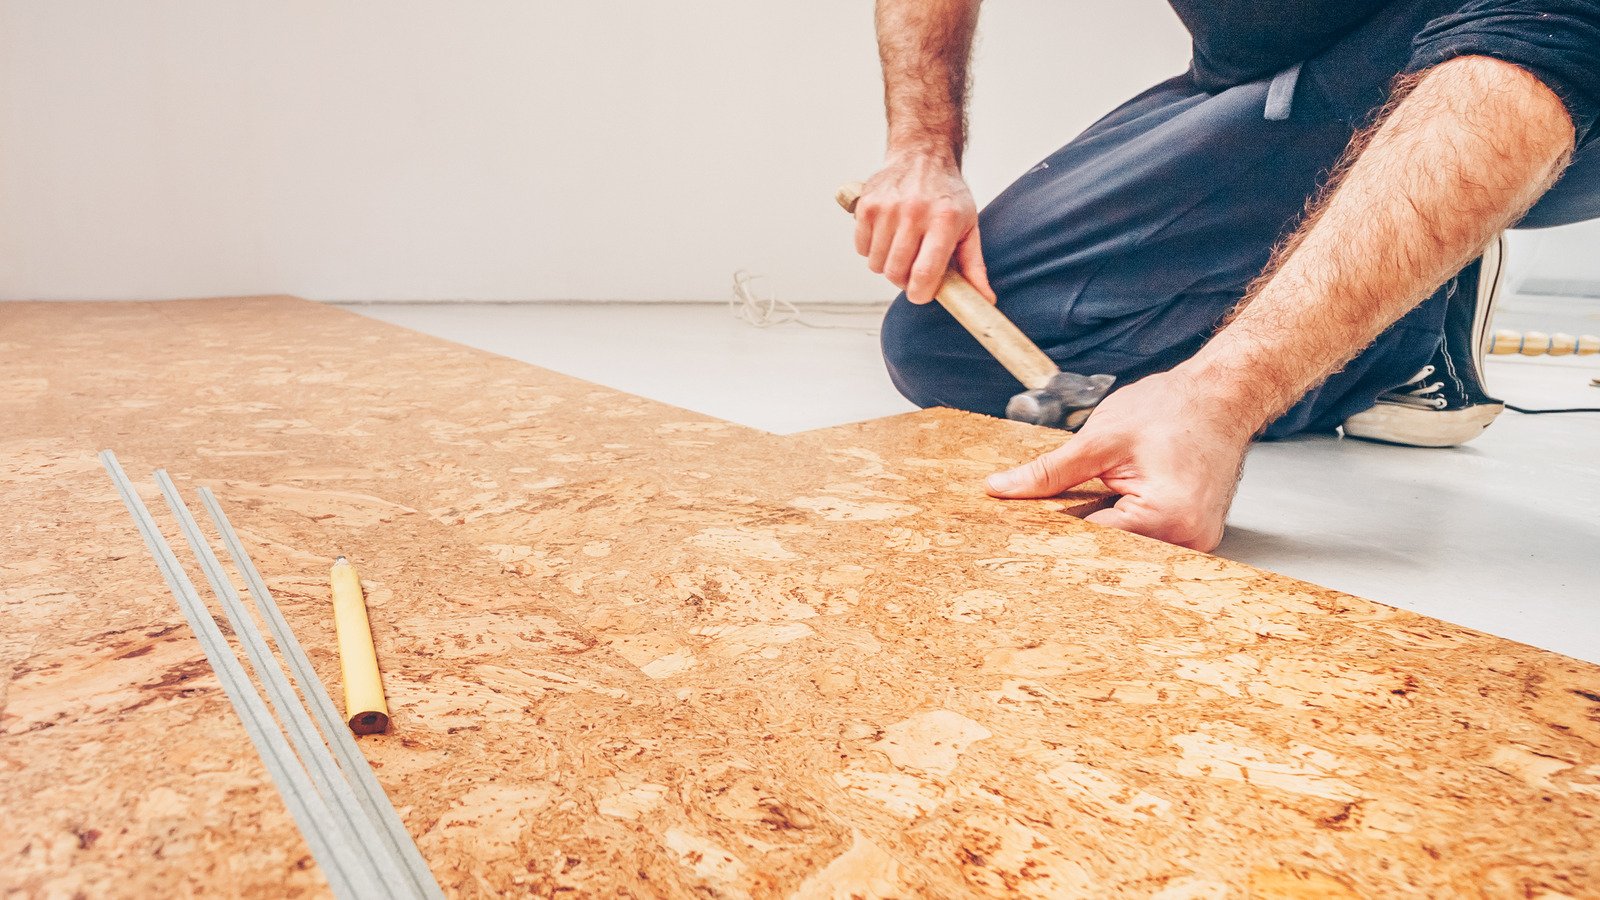 Here's What You Should Know Before Using Cork Tiles In Your Bathroom - House Digest